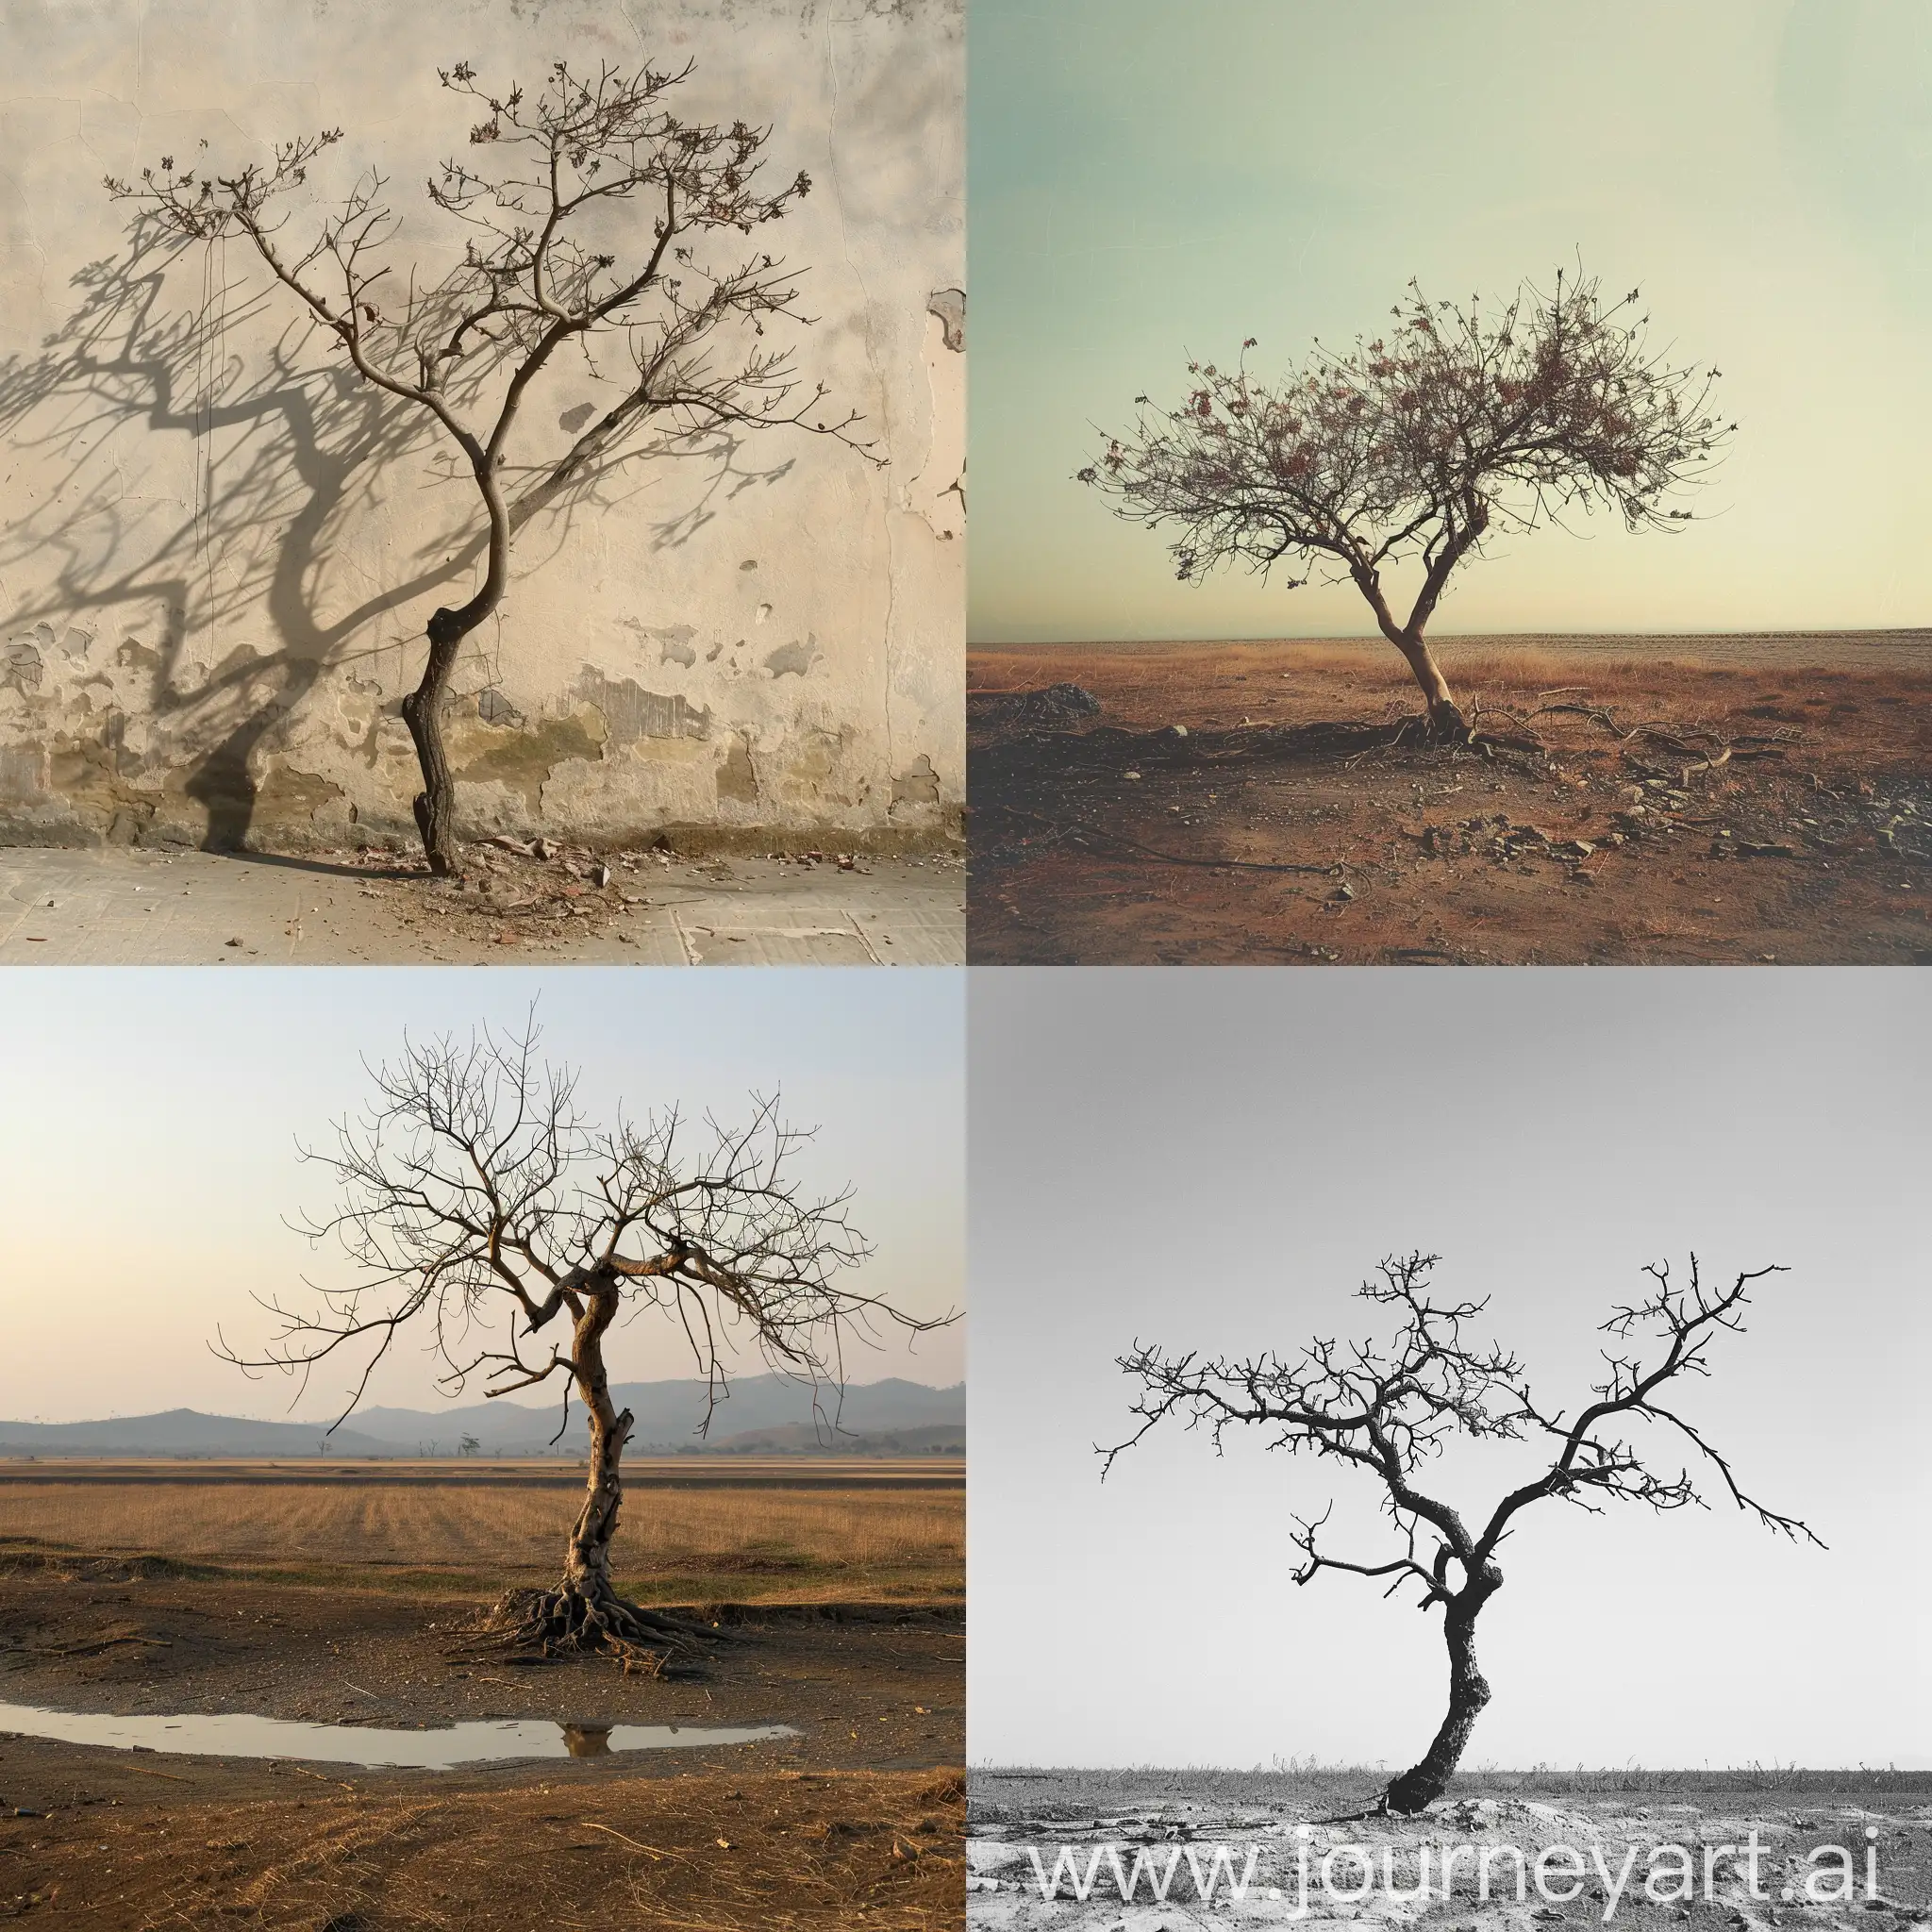 Withered-Tree-in-Arid-Landscape